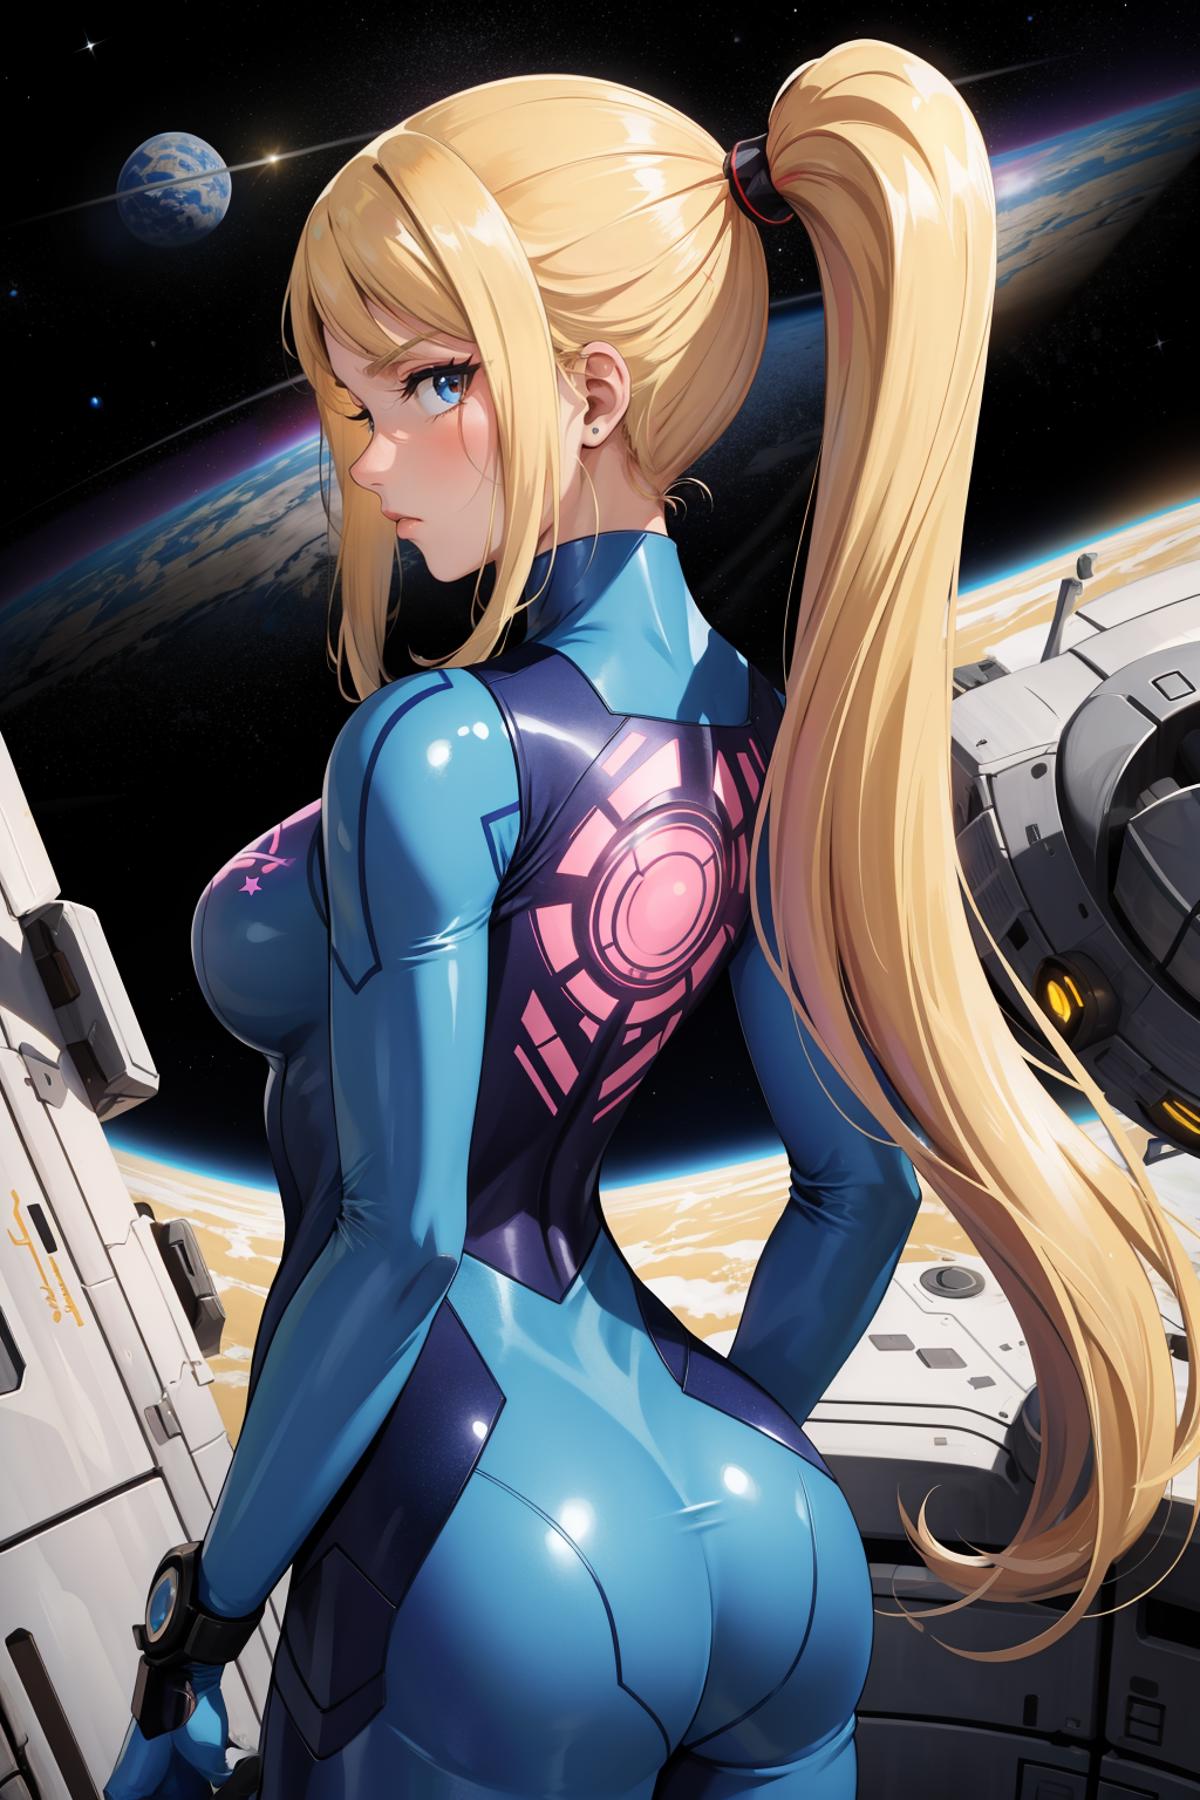 Anime girl with long blonde hair and blue eyes in a blue bodysuit stands in front of a space shuttle.